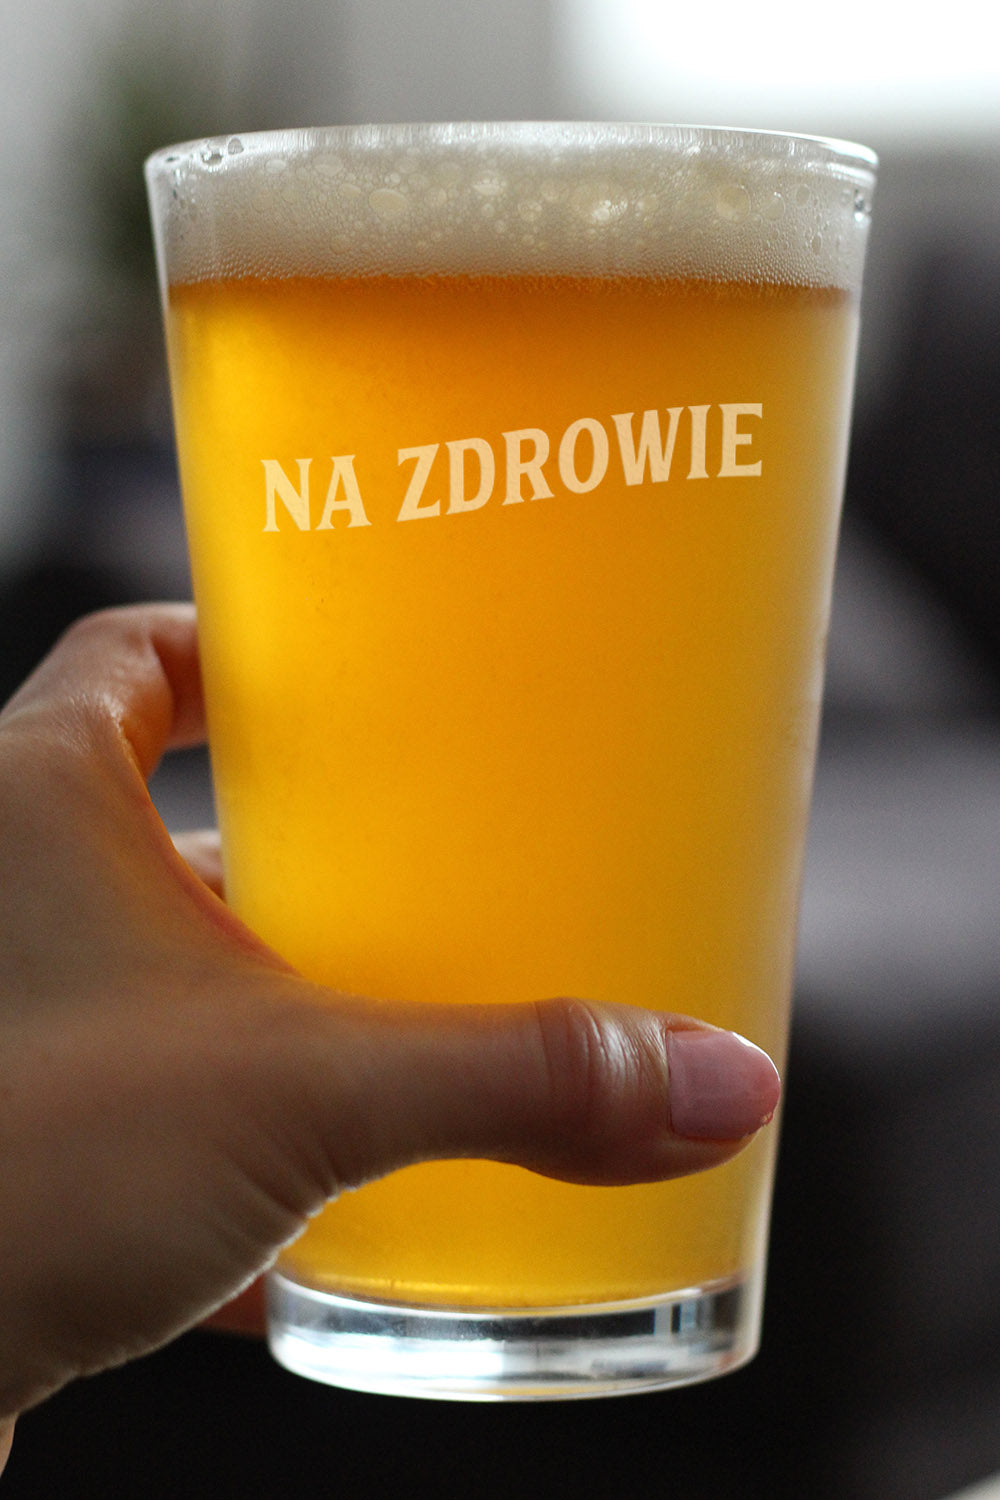 Na Zdrowie - Polish Cheers - Pint Glass for Beer - Cute Poland Themed Gifts or Party Decor for Women and Men - 16 Oz